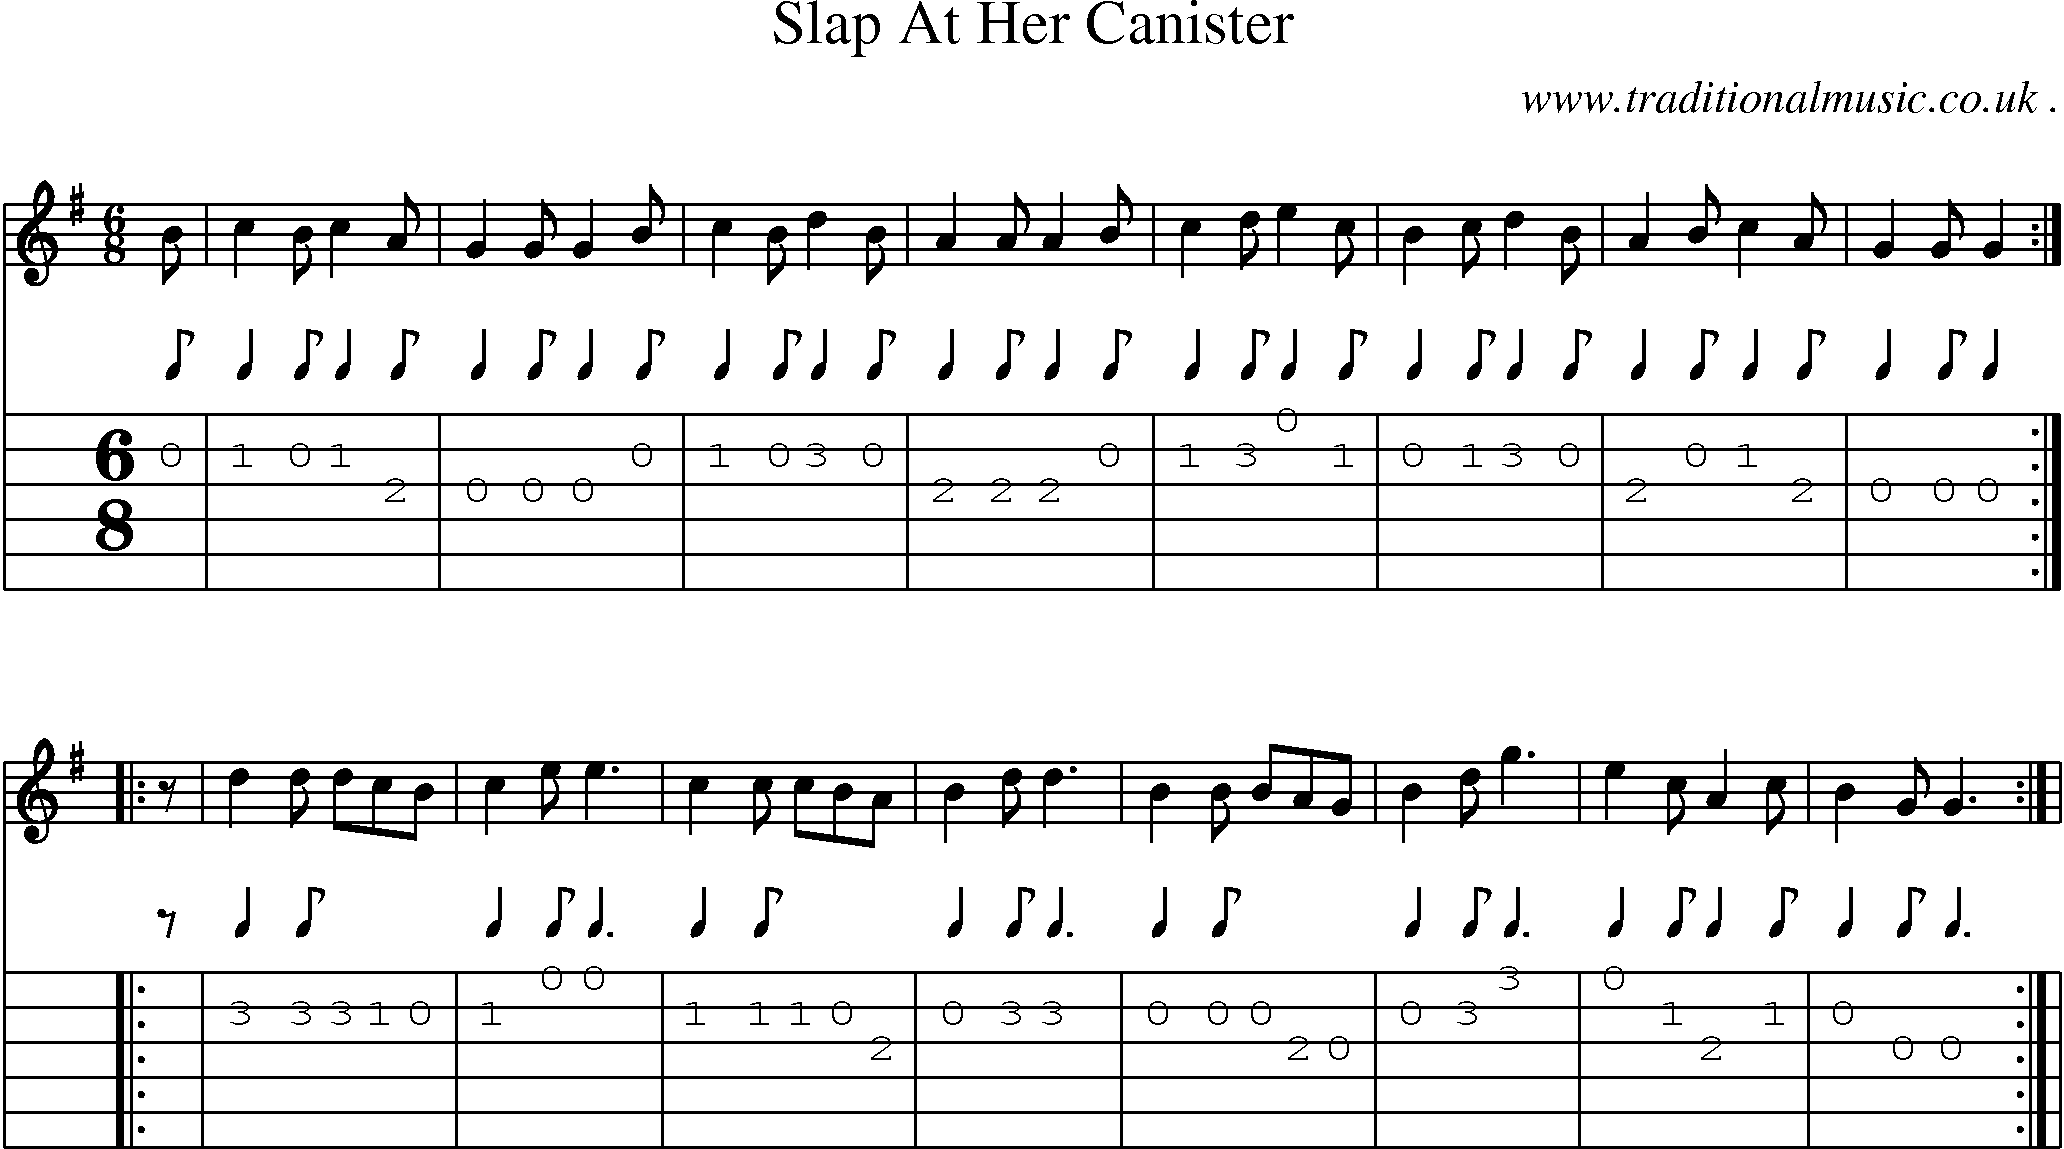 Sheet-Music and Guitar Tabs for Slap At Her Canister